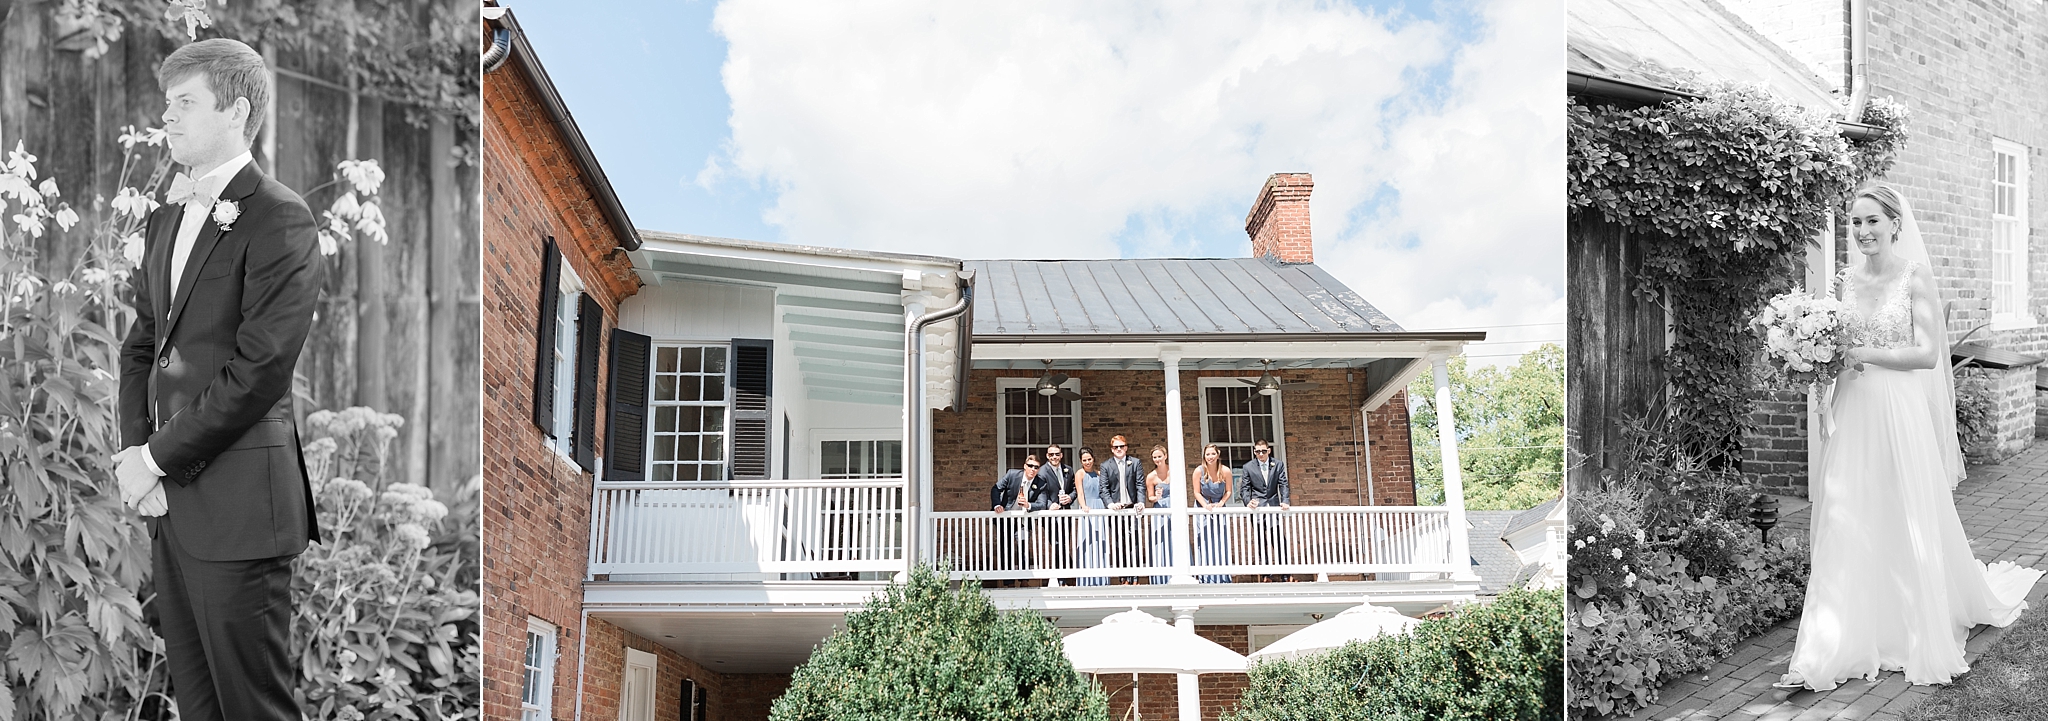 This Thomas Birkby House wedding photographed by DC photographer, Alicia Lacey, was an elegant affair complete with lush floral designs by Holly Chapple.  